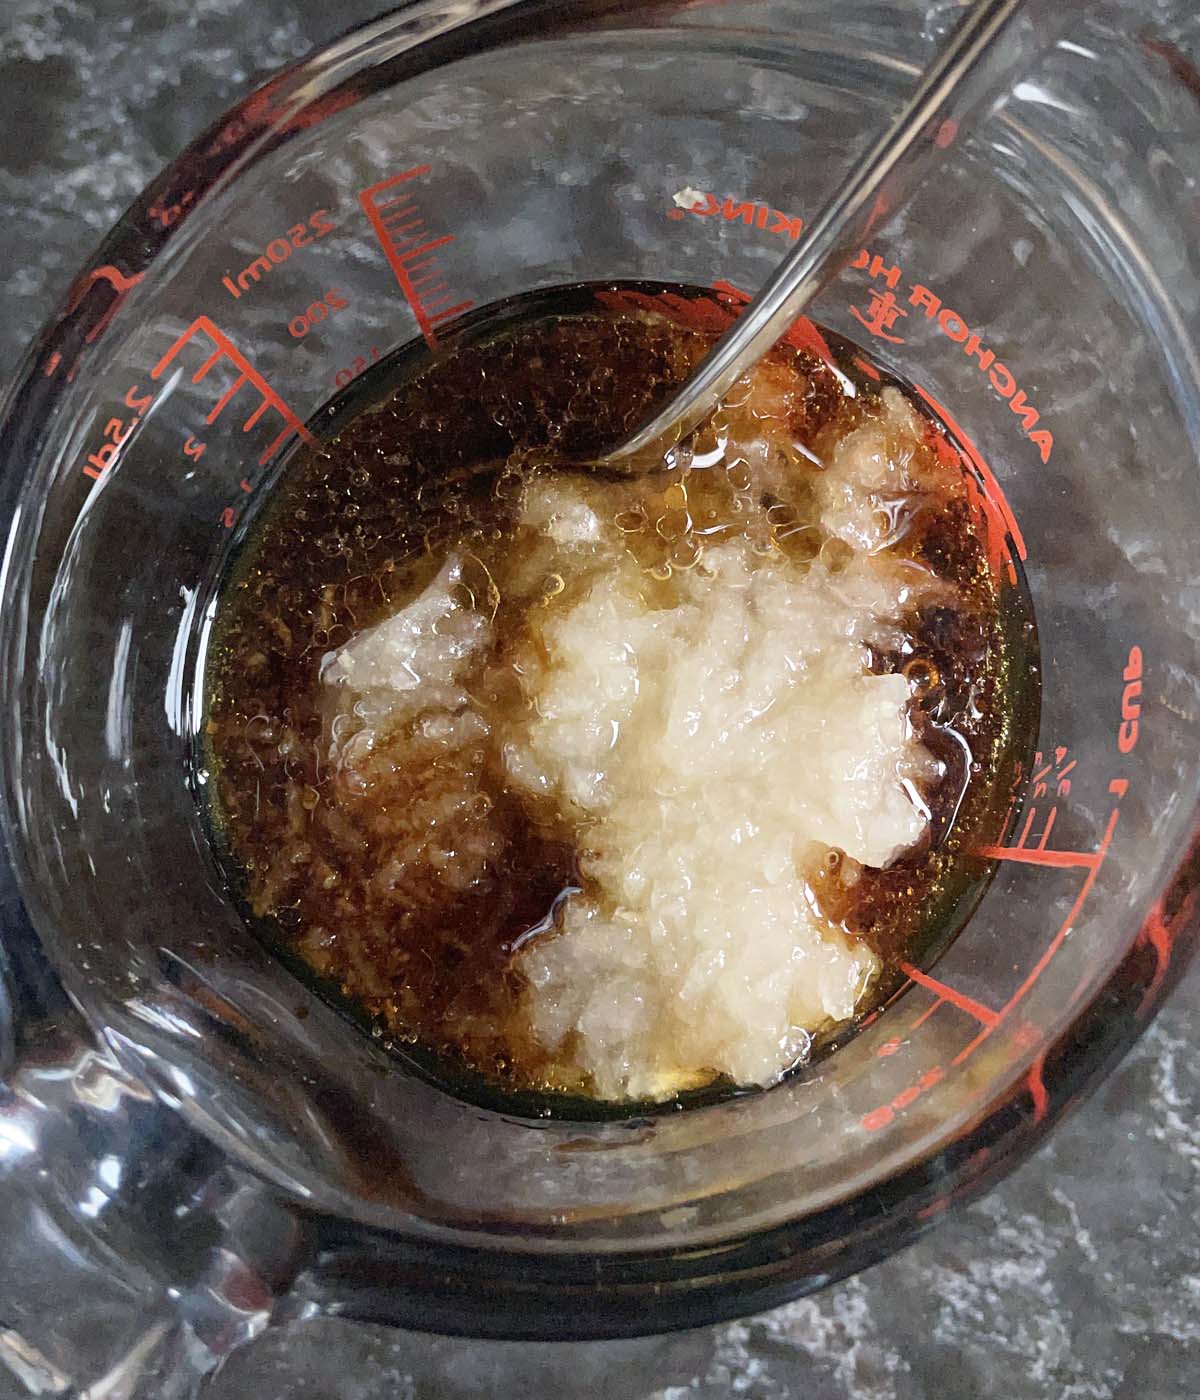 A glass measuring cup containing a metal spoon, brown liquid and grated pear.